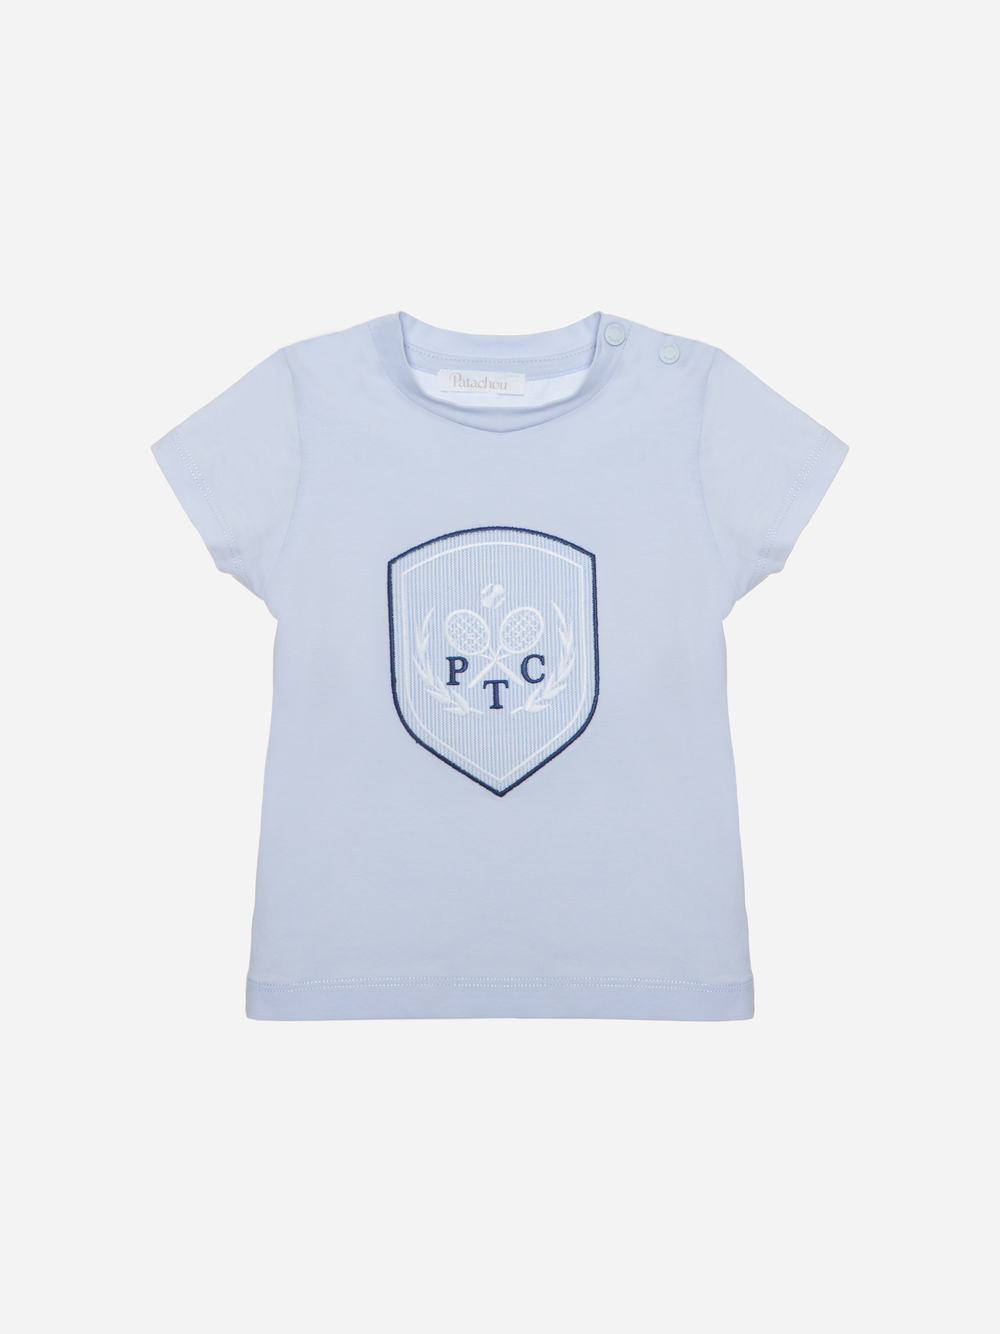 Boys blue t-shirt with front print